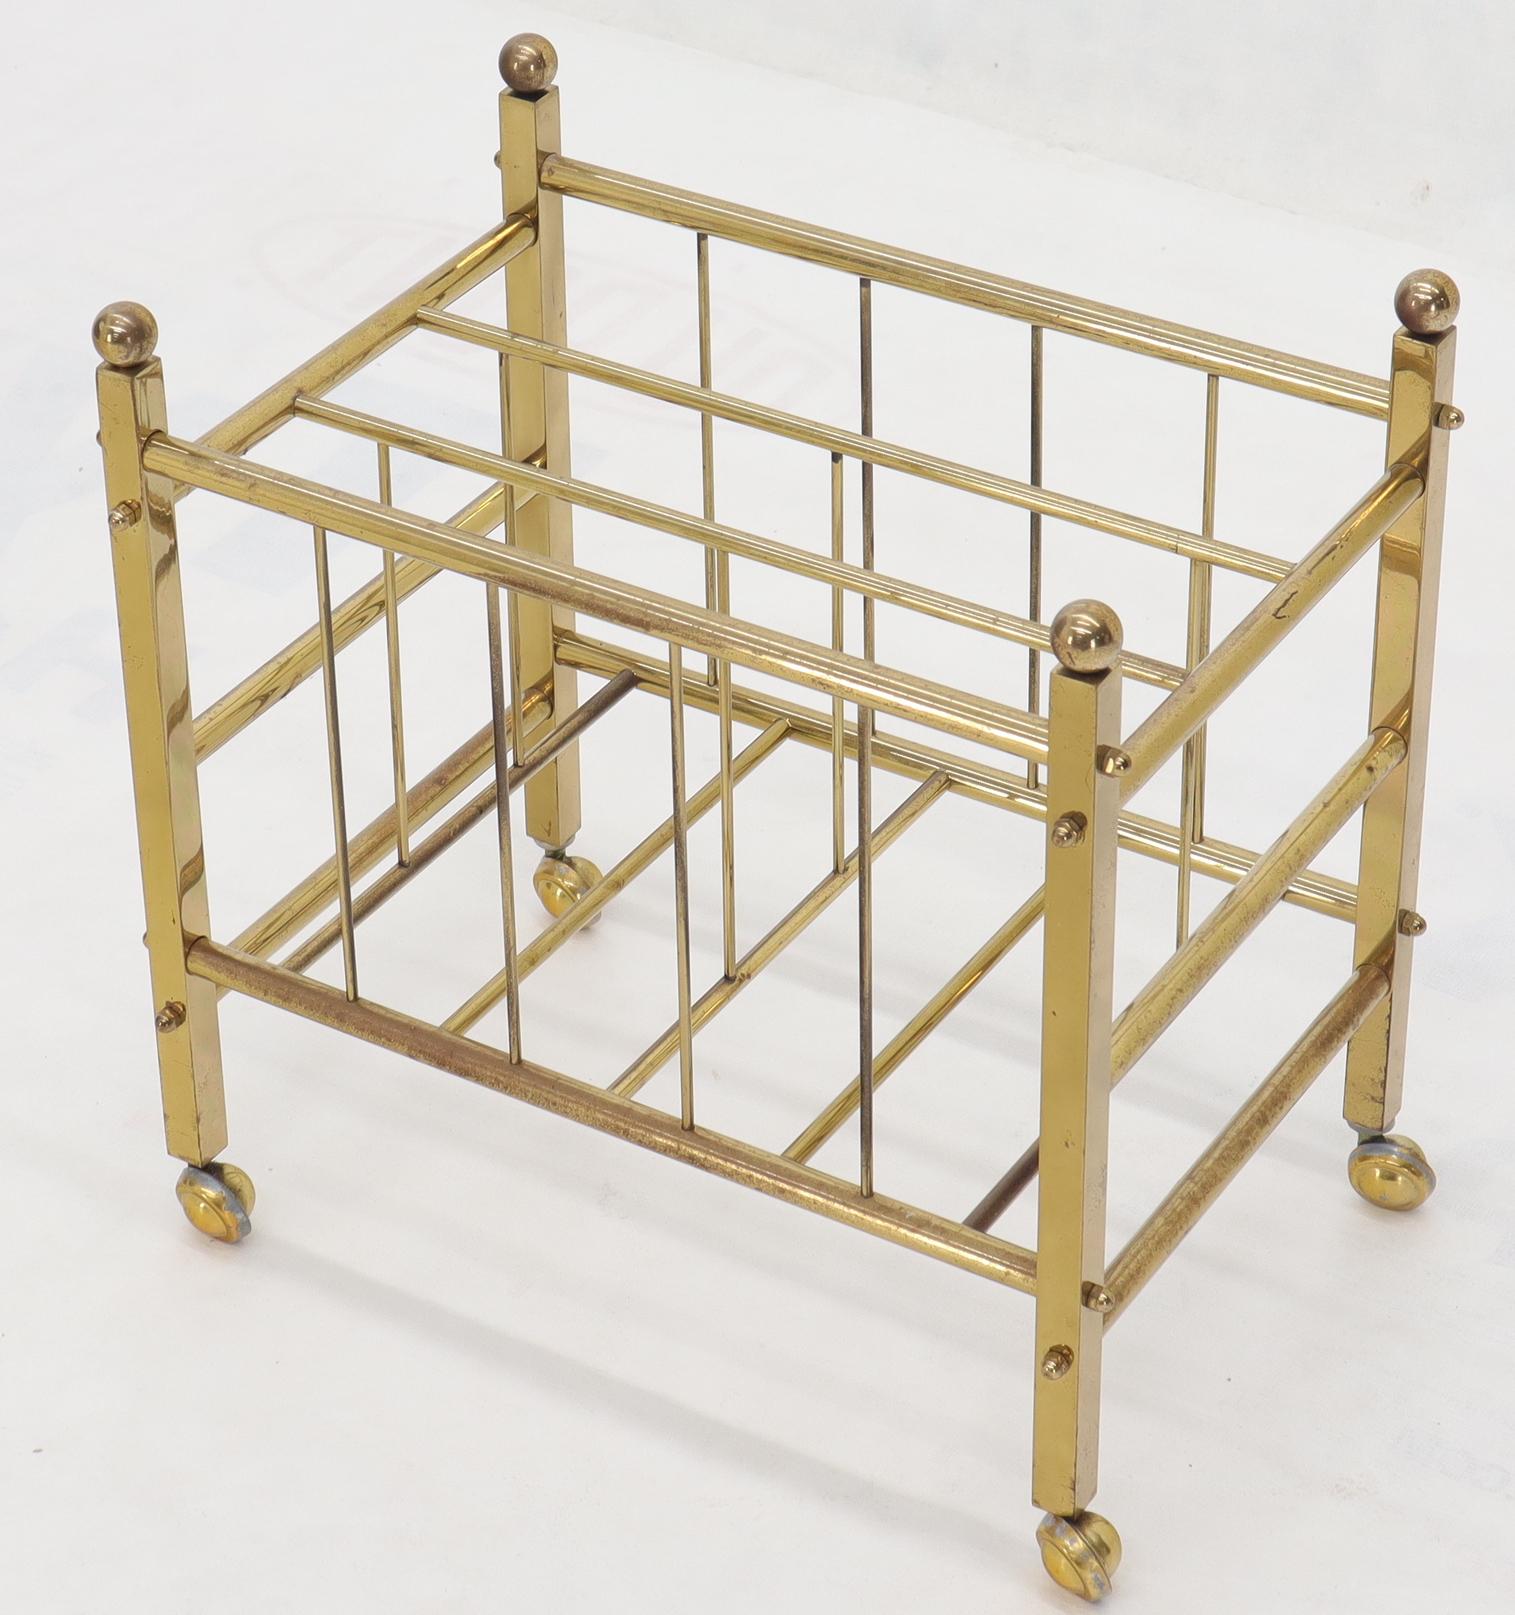 20th Century Pair of Mid-Century Modern Polished Brass Magazine Racks on Metal Casters For Sale